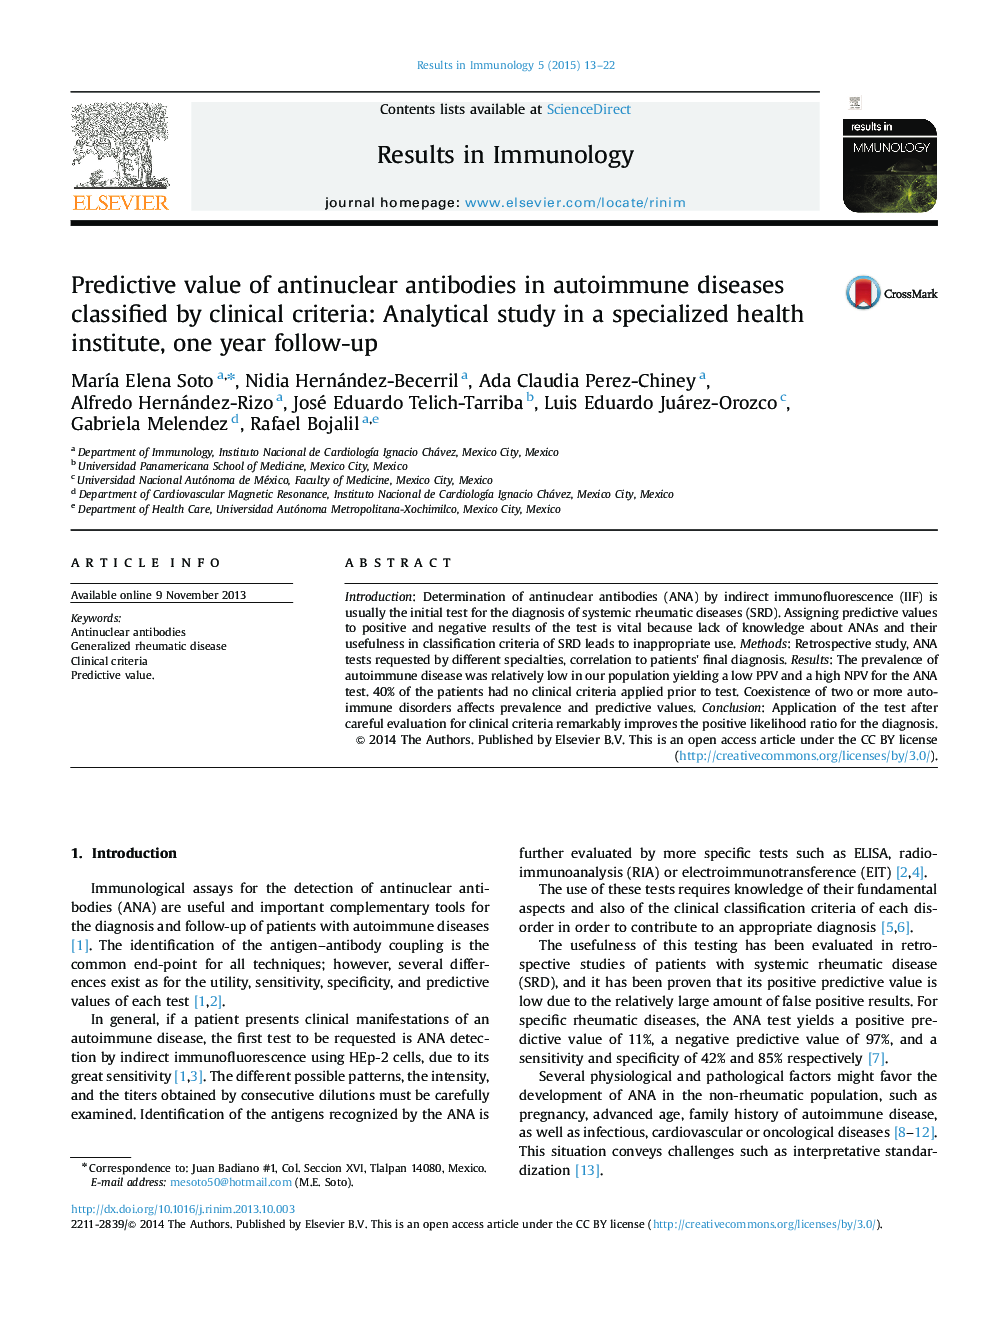 Predictive value of antinuclear antibodies in autoimmune diseases classified by clinical criteria: Analytical study in a specialized health institute, one year follow-up